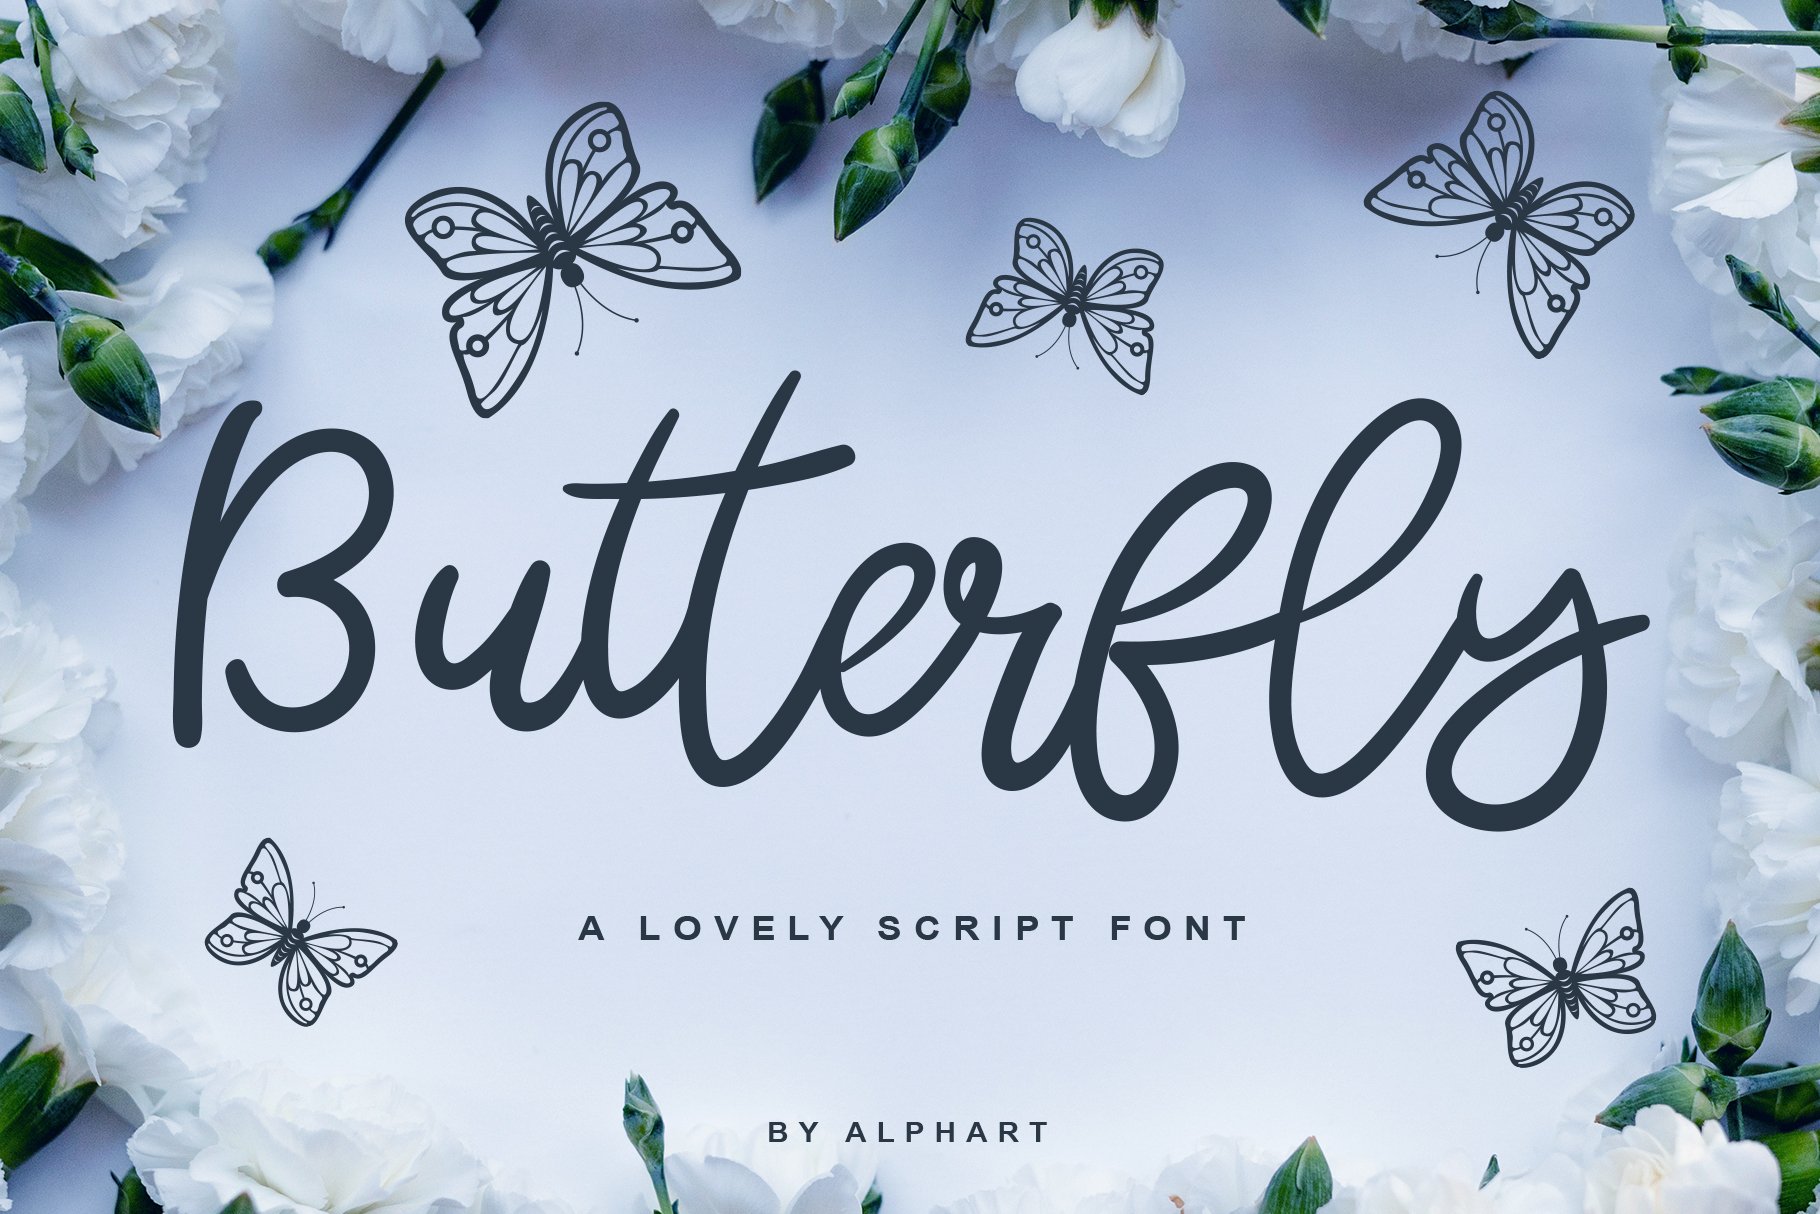 Butterfly a lovely script font cover image.